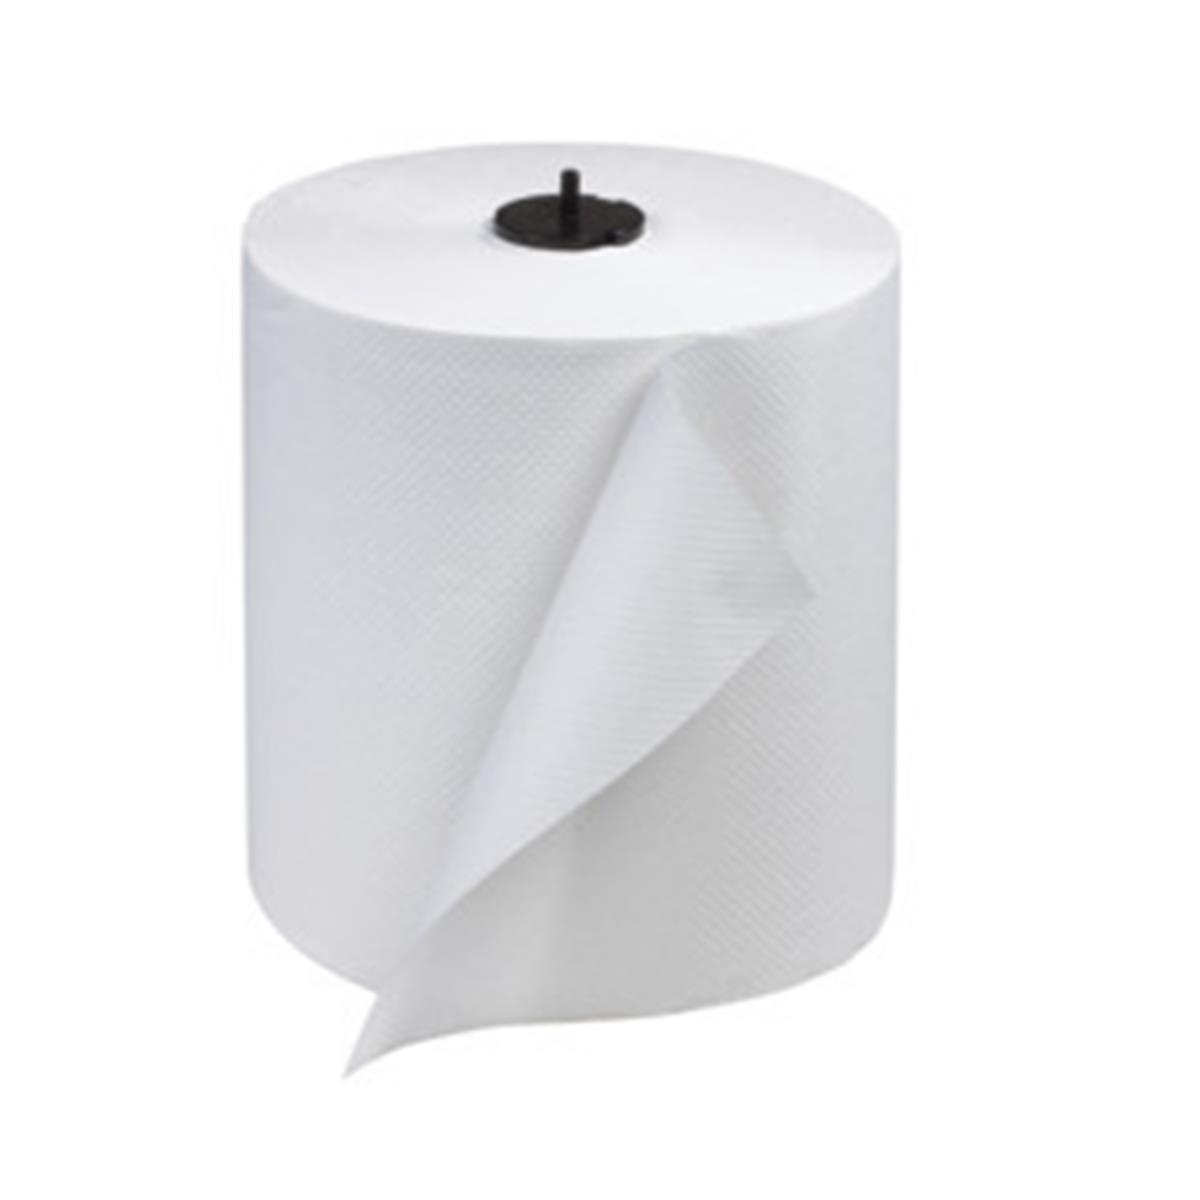 290089 7.75 In. X 700 Ft. 1-ply Tork Advanced Matic Hand Towel Roll, White - Case Of 6